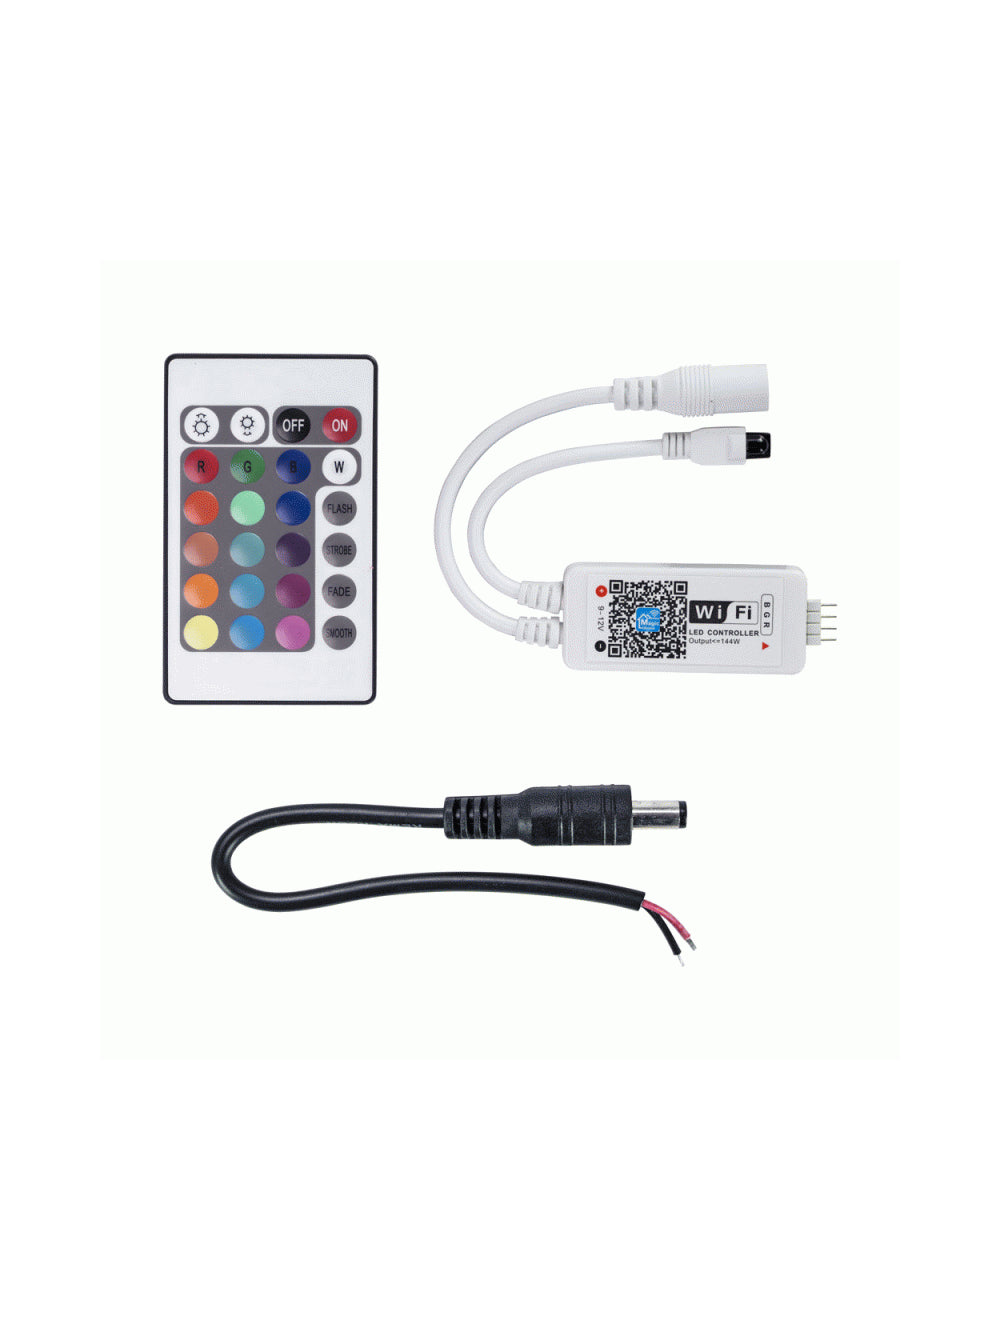 Heise HE-WFRGBC-1 Controller 16 Color Rgb Wifi Controller